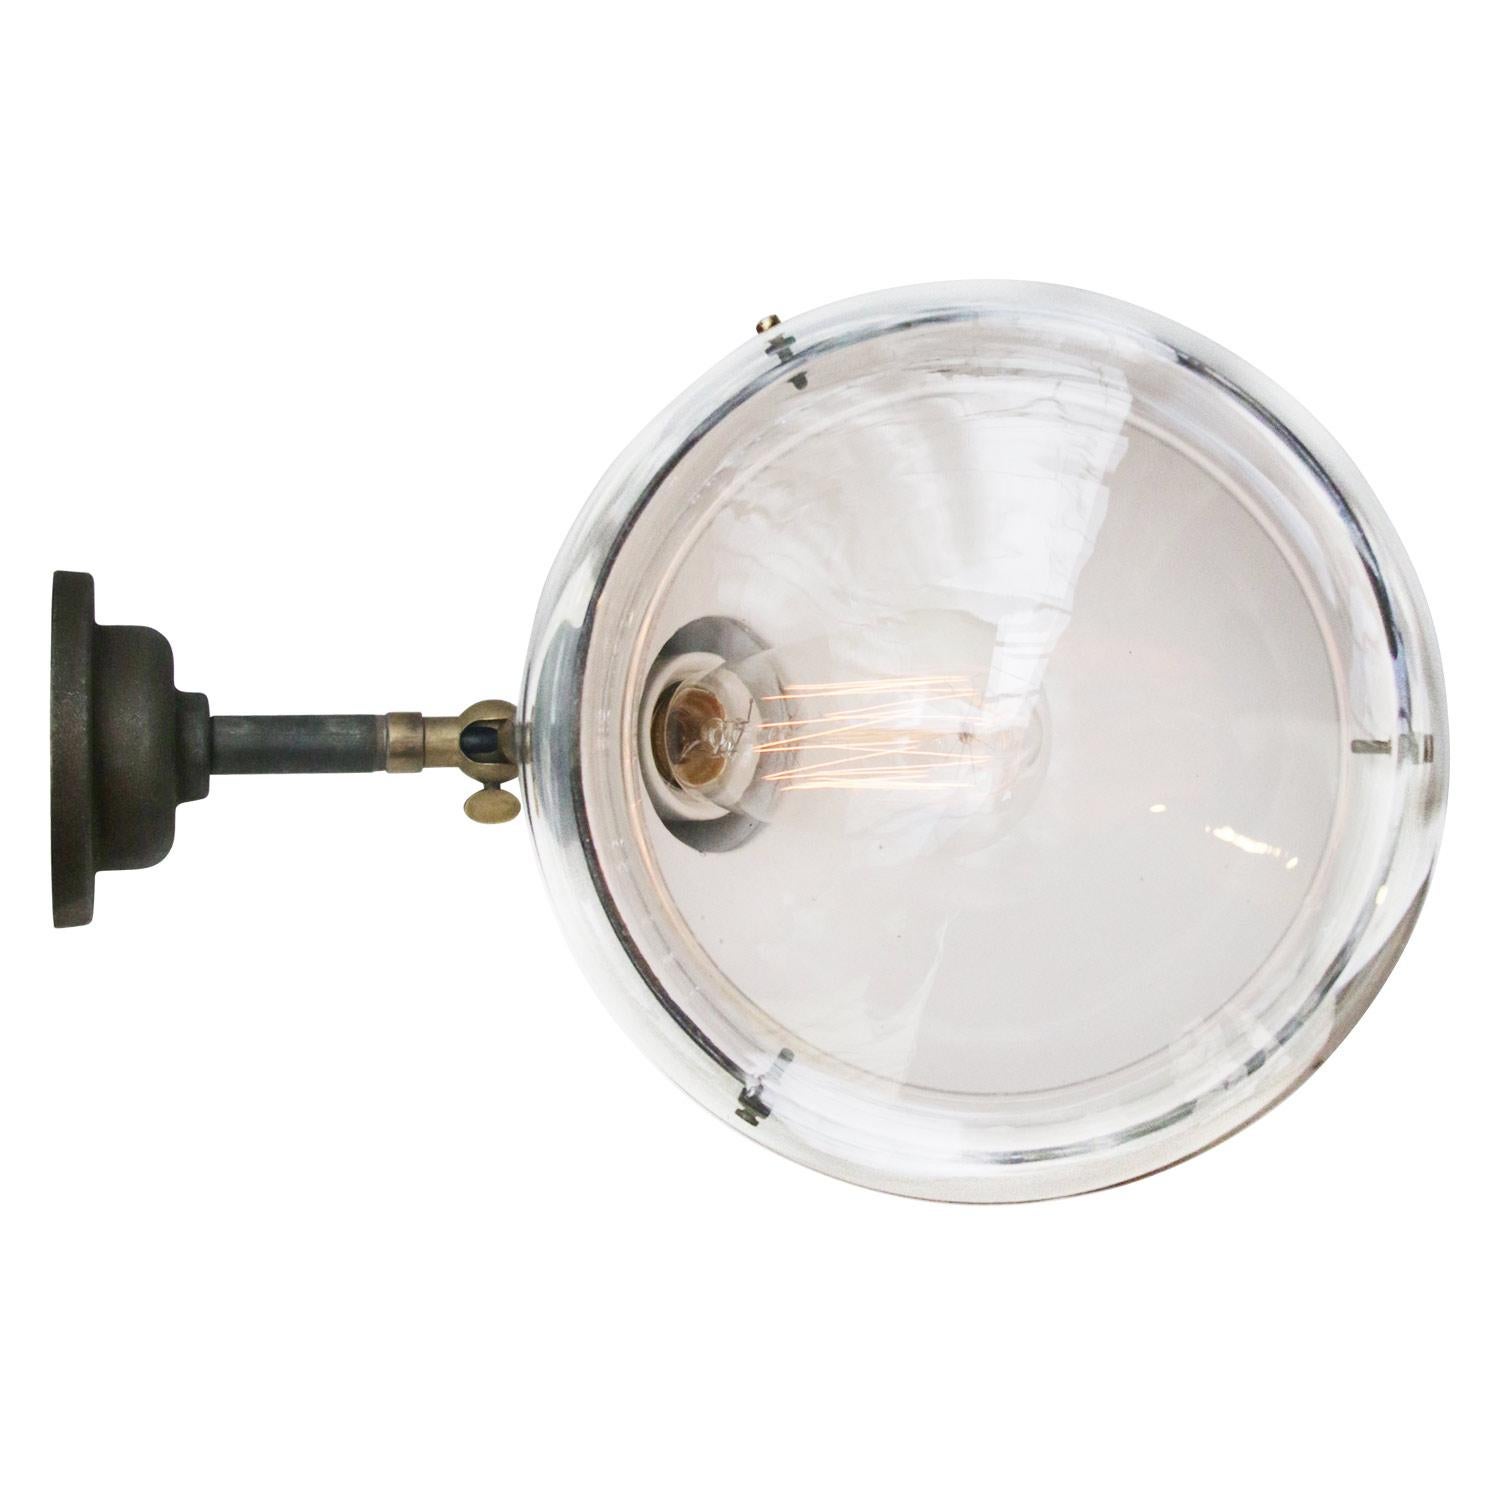 Vintage industrial wall light with round clear glass
Gray enamel, cast iron parts and wall base

Diameter wall mount 10.5 cm / 4”.

Weight: 2.00 kg / 4.4 lb.

Priced per individual item. All lamps have been made suitable by international standards